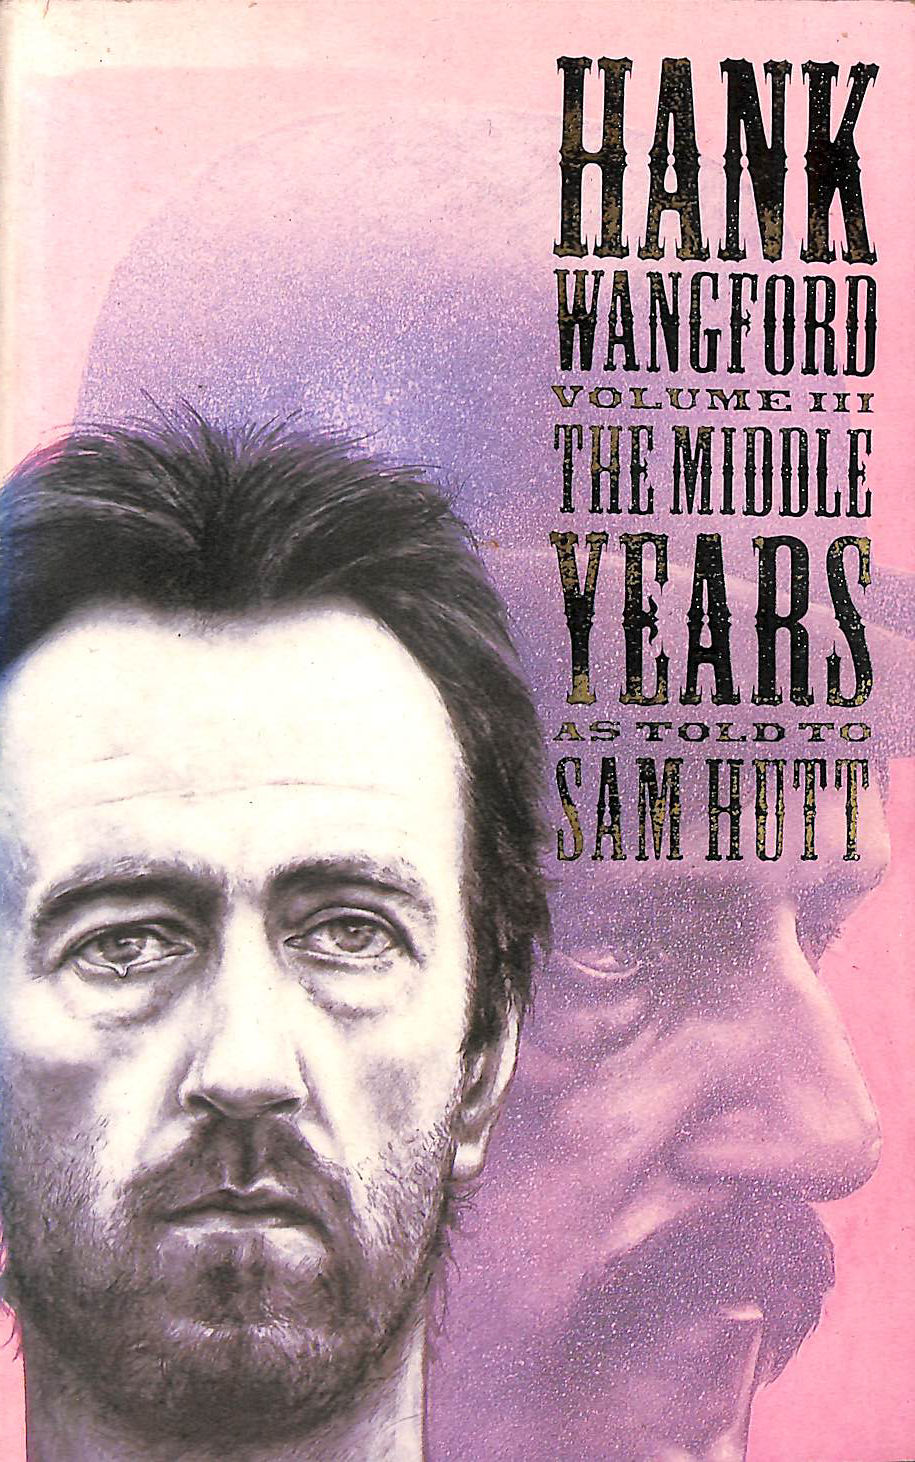 WANGFORD, HANK - Hank Wangford: The Middle Years v.3: The Later Years v. 3